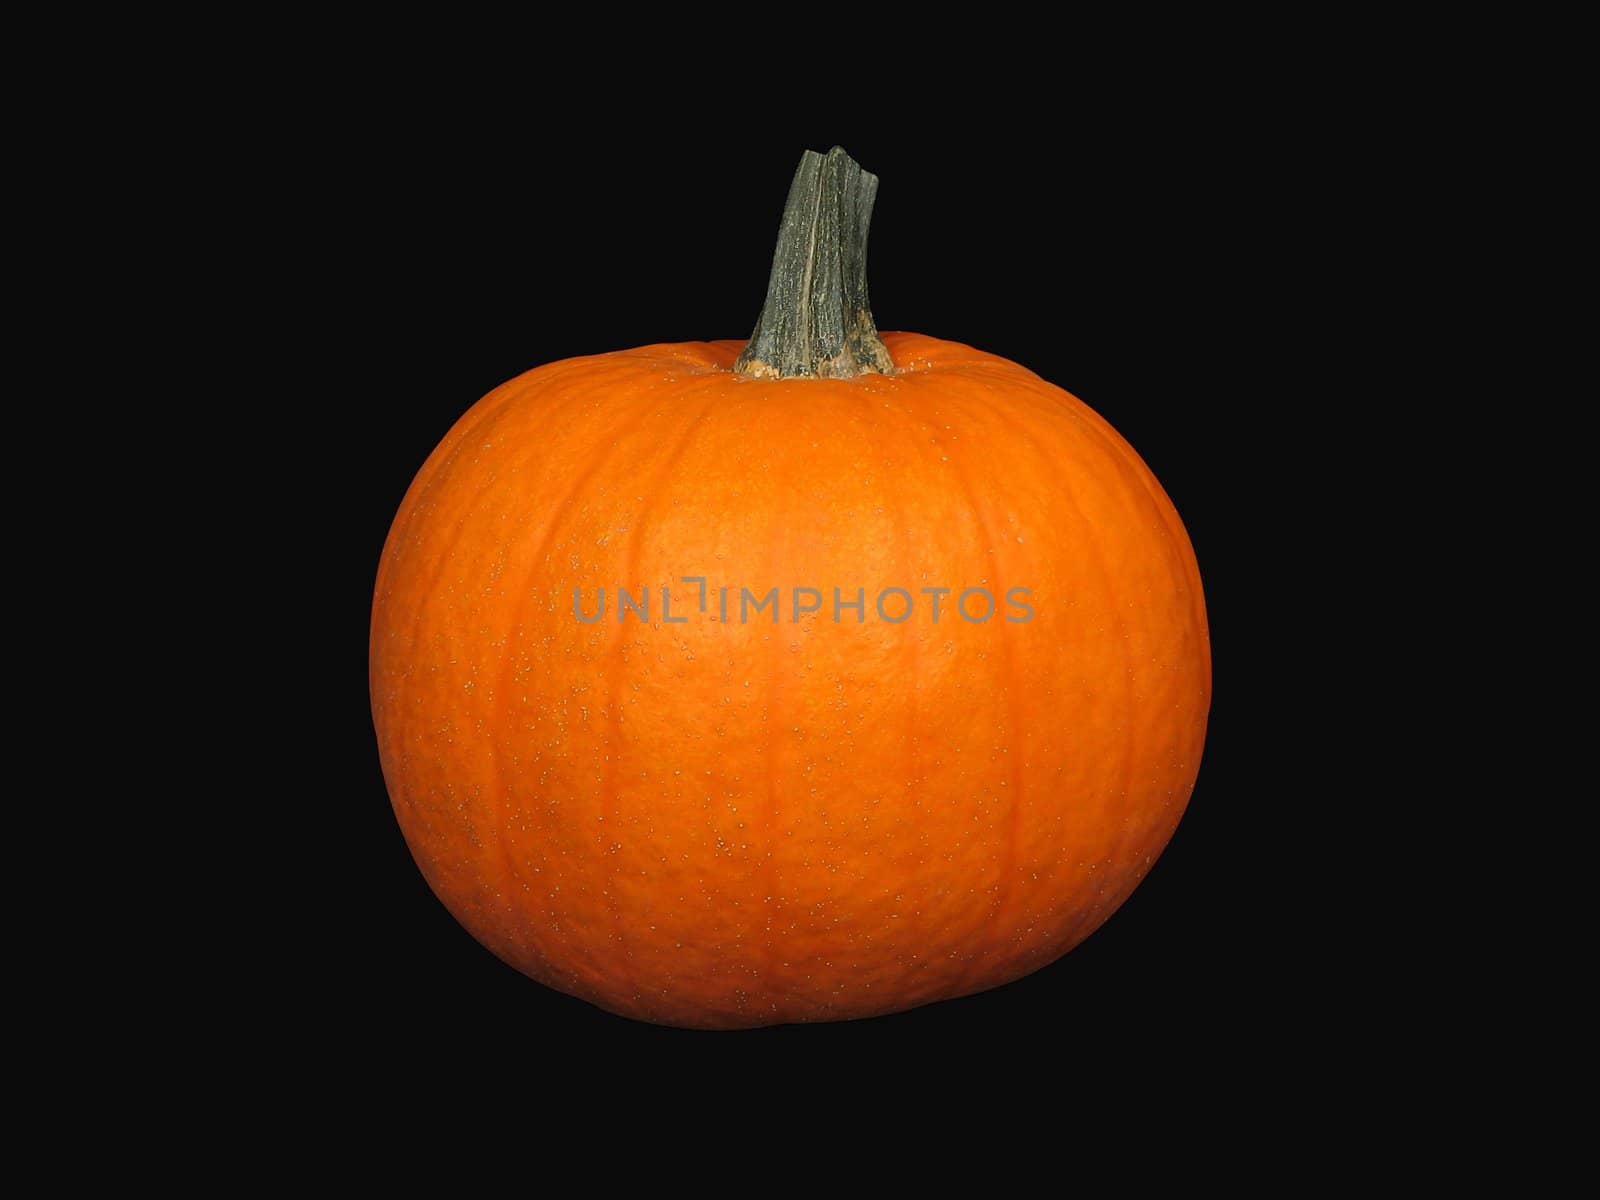 Pumpkin isolated on black. Contains clipping path.